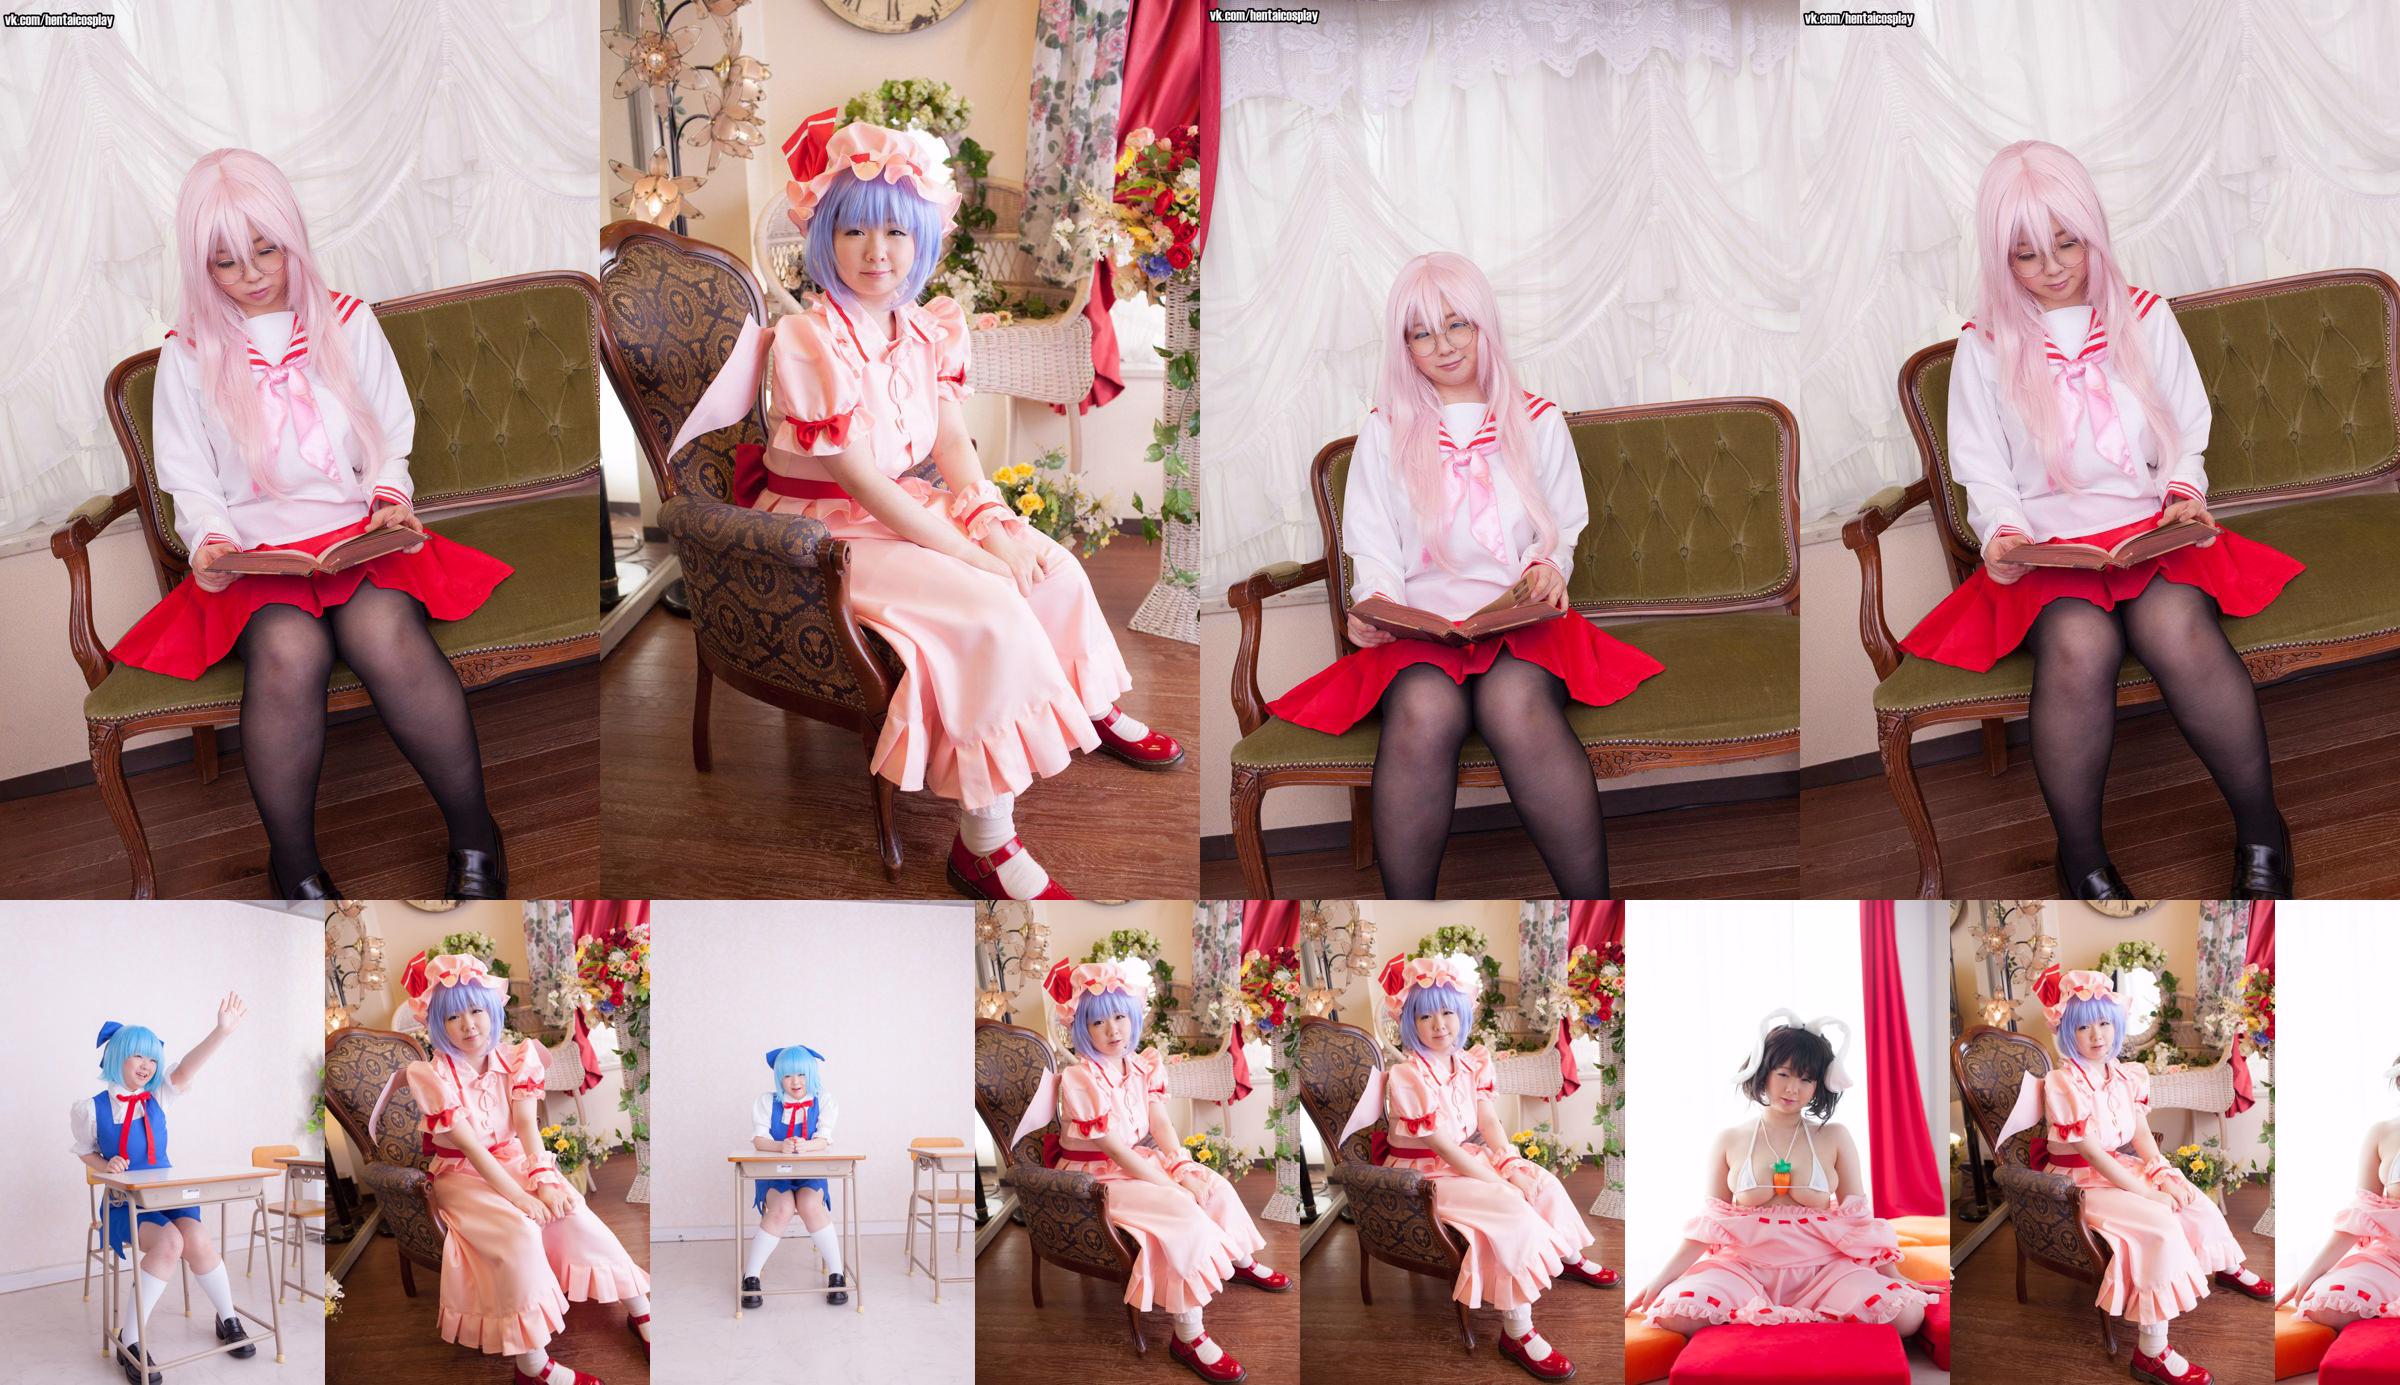 Mana(まな) 《東方Project》Remilia Scarlet [@factory] No.c52d7f 第27页